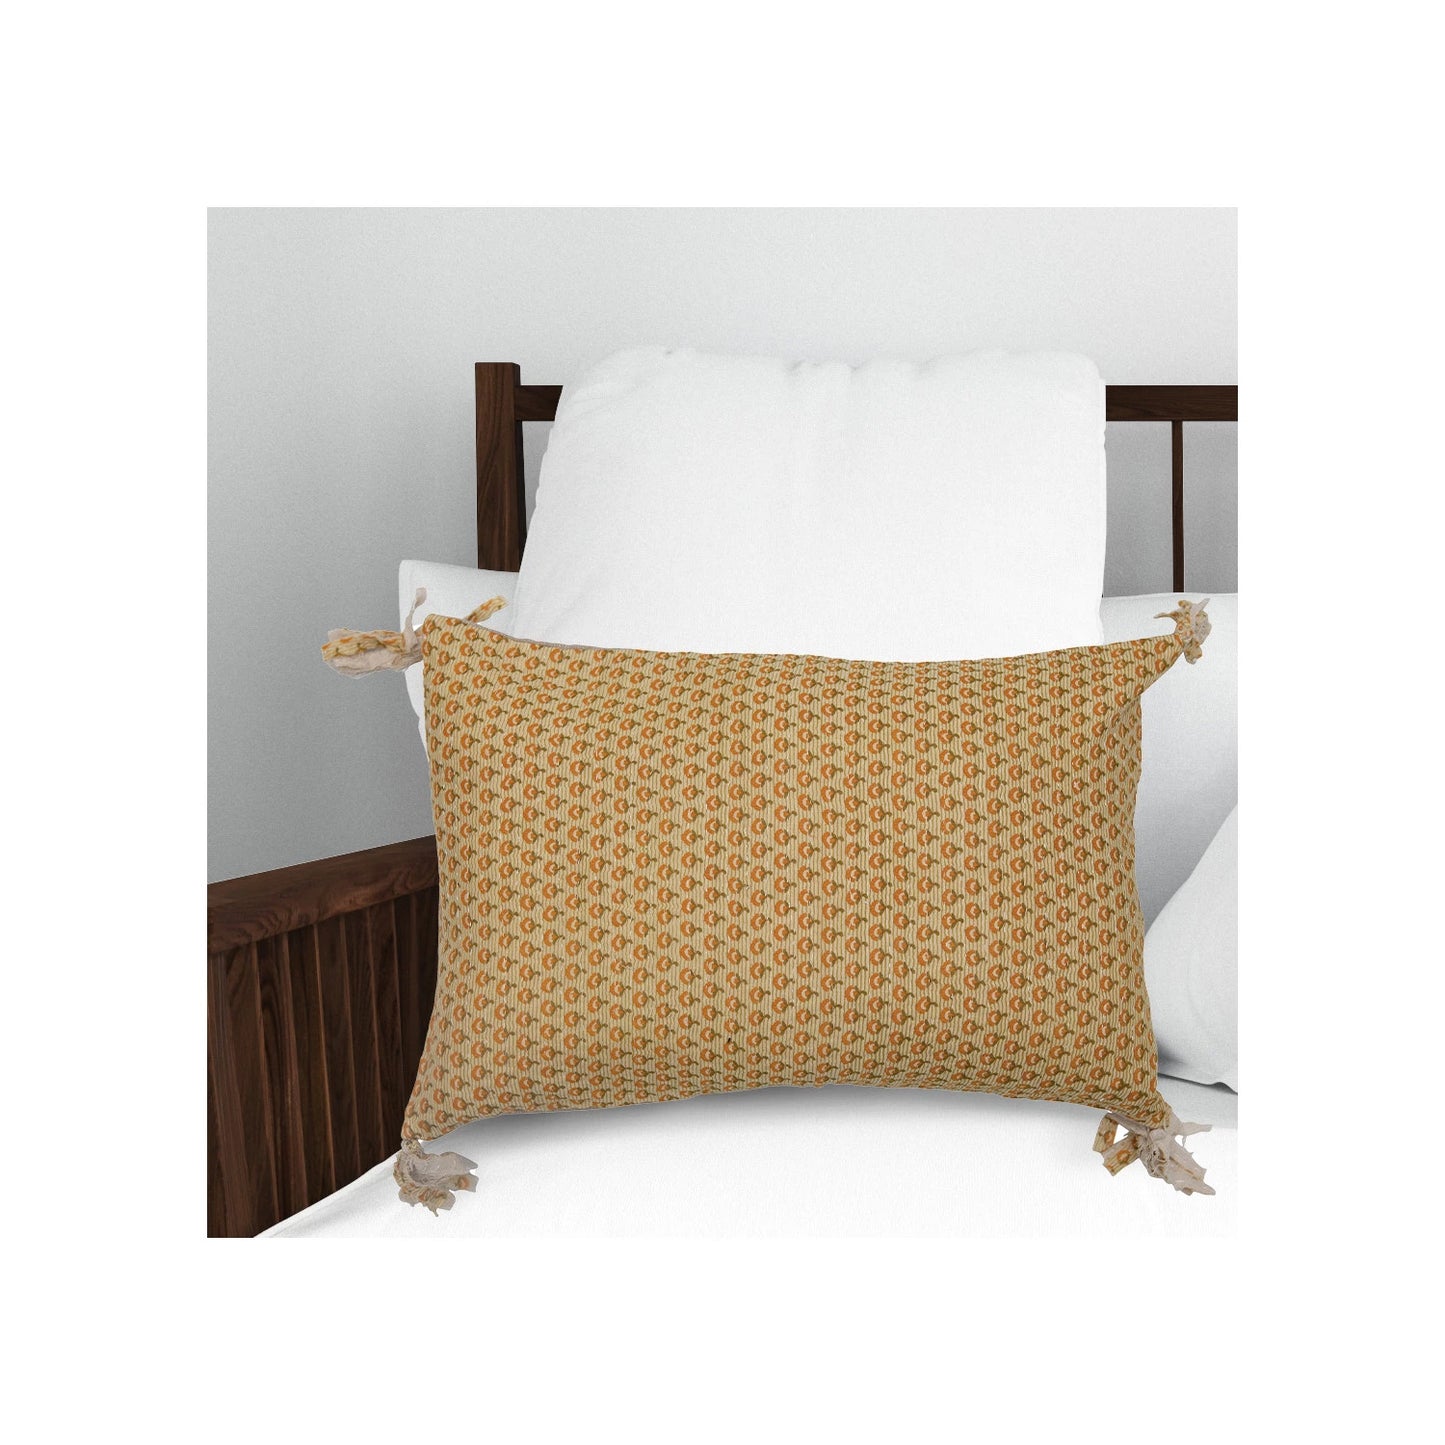 24" x 16" Cotton Printed Lumbar Pillow with Frayed Tassels